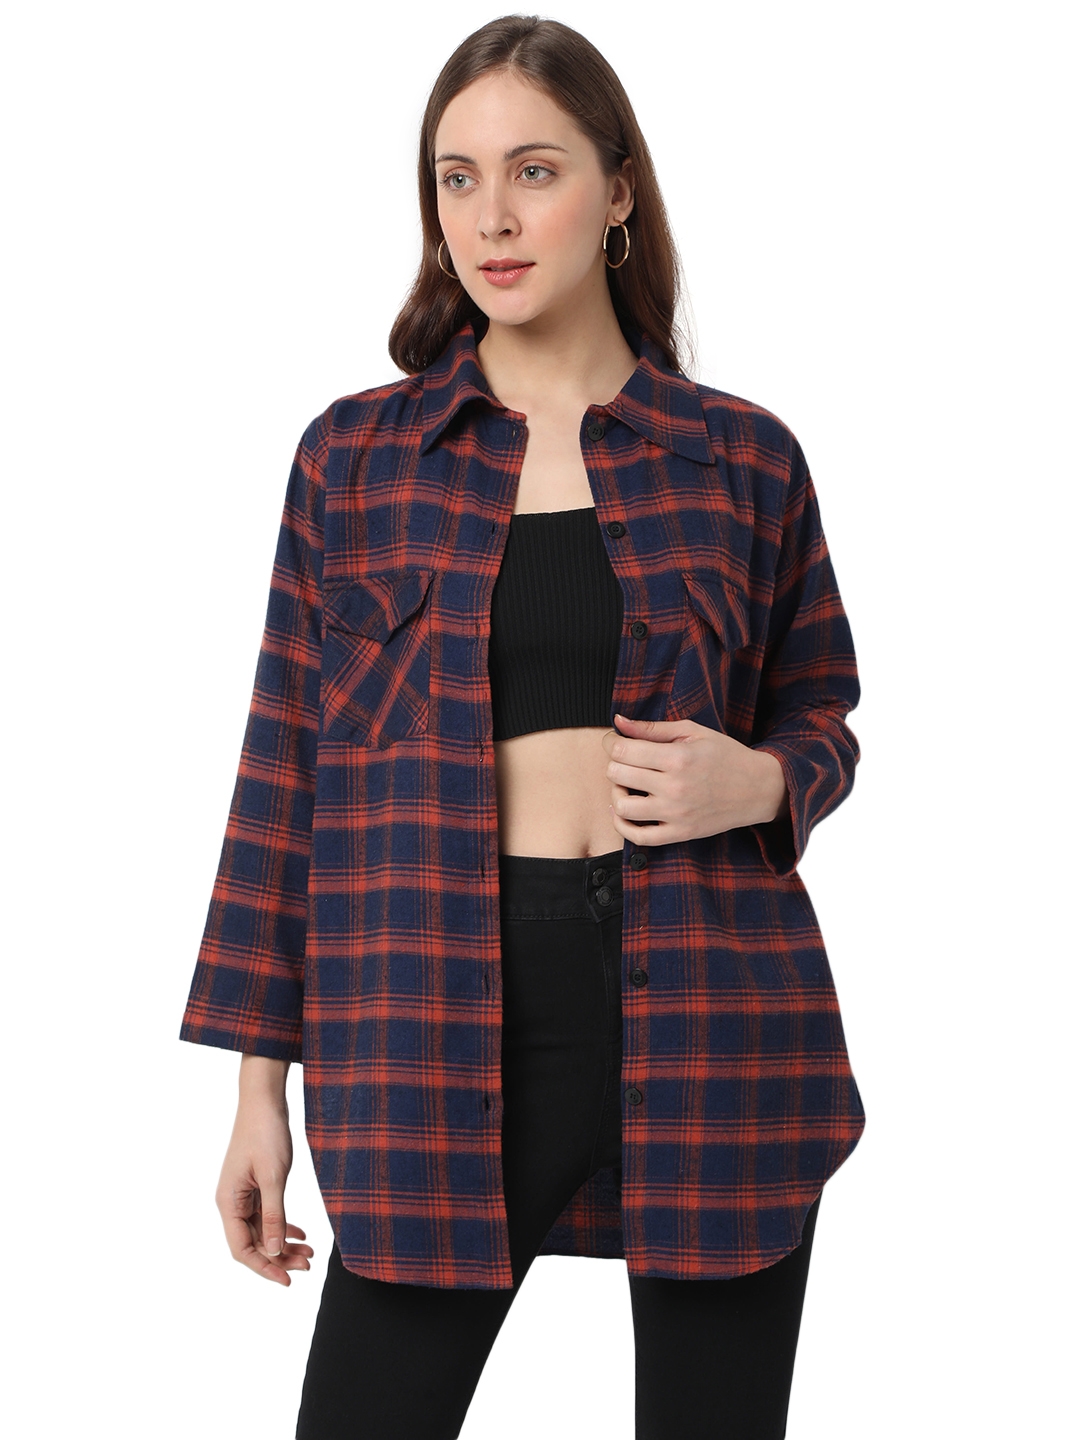 NSw5zwTug Smarty Pants womens cotton maroon color checkered long line checks jacket.